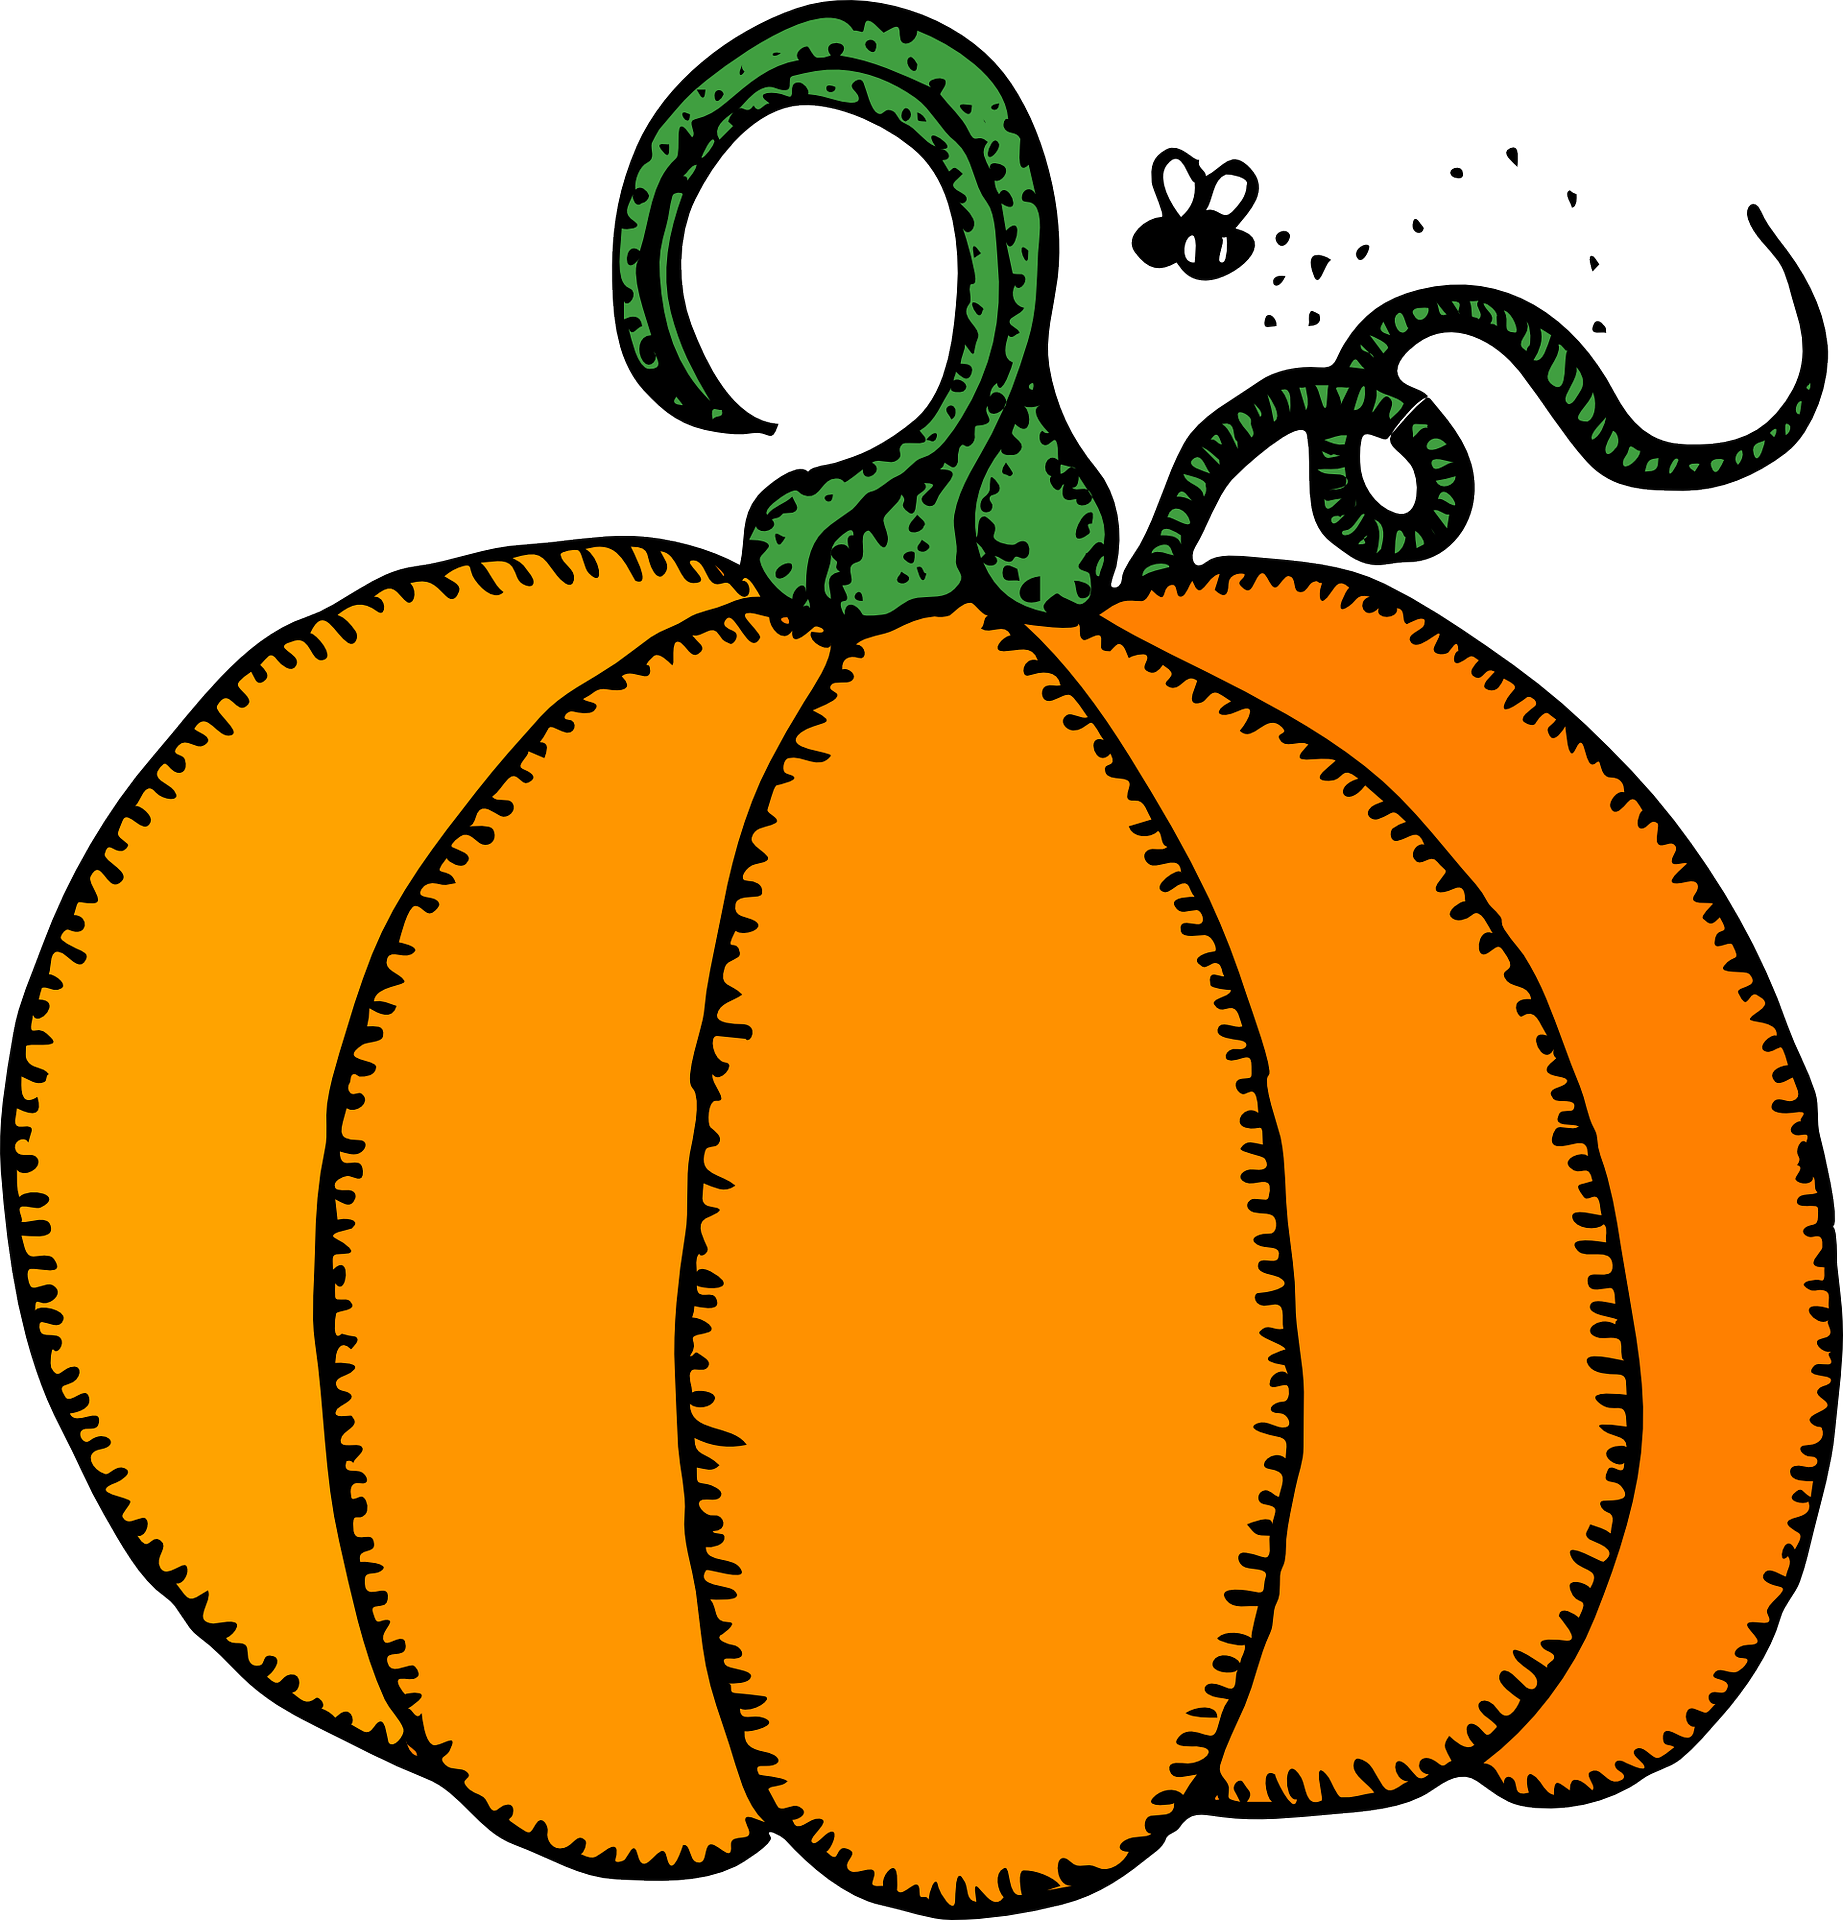 Kennedy's Pumpkin Patch special offer - The Lime Kiln